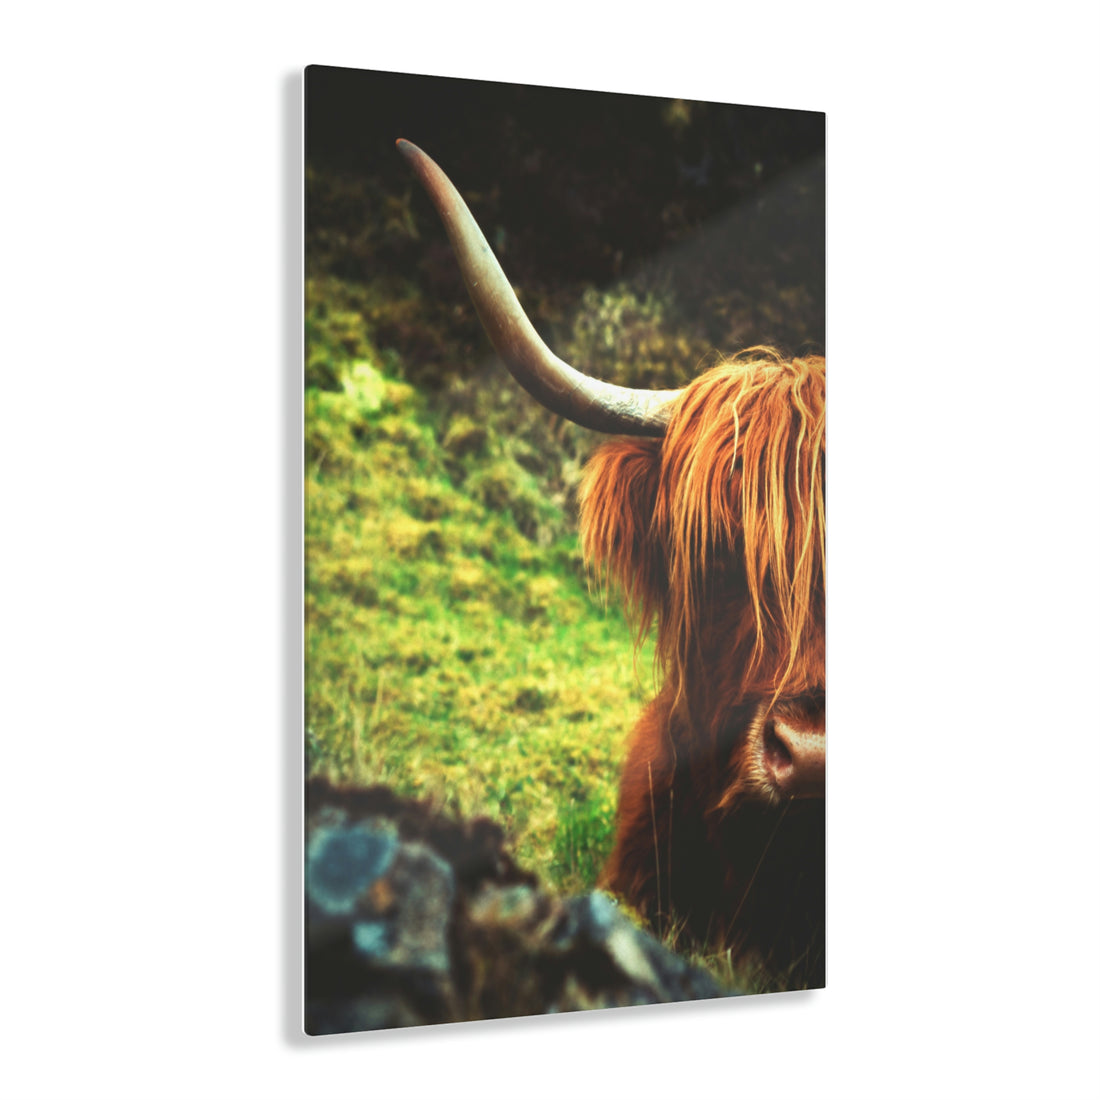 Hide and Horns: A Whimsical Tale of Highland Cow's Peek-a-Boo in Scotland